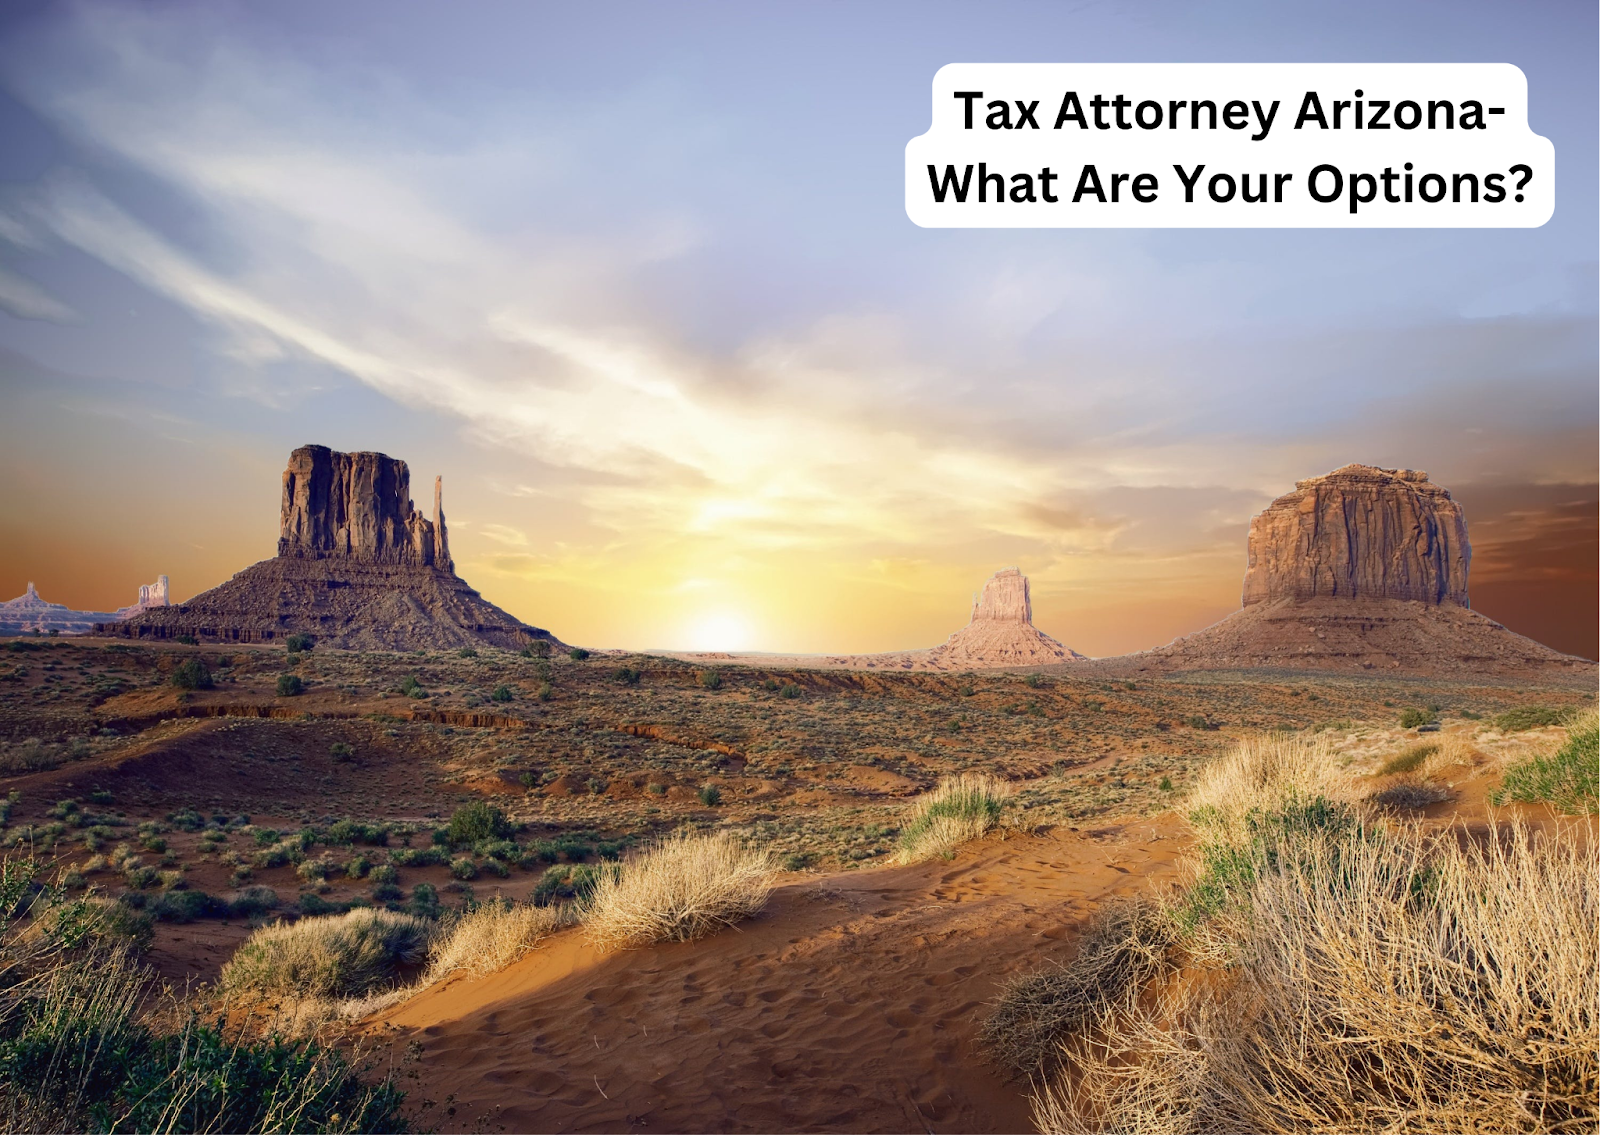 Tax Attorney Arizona- What Are Your Options?